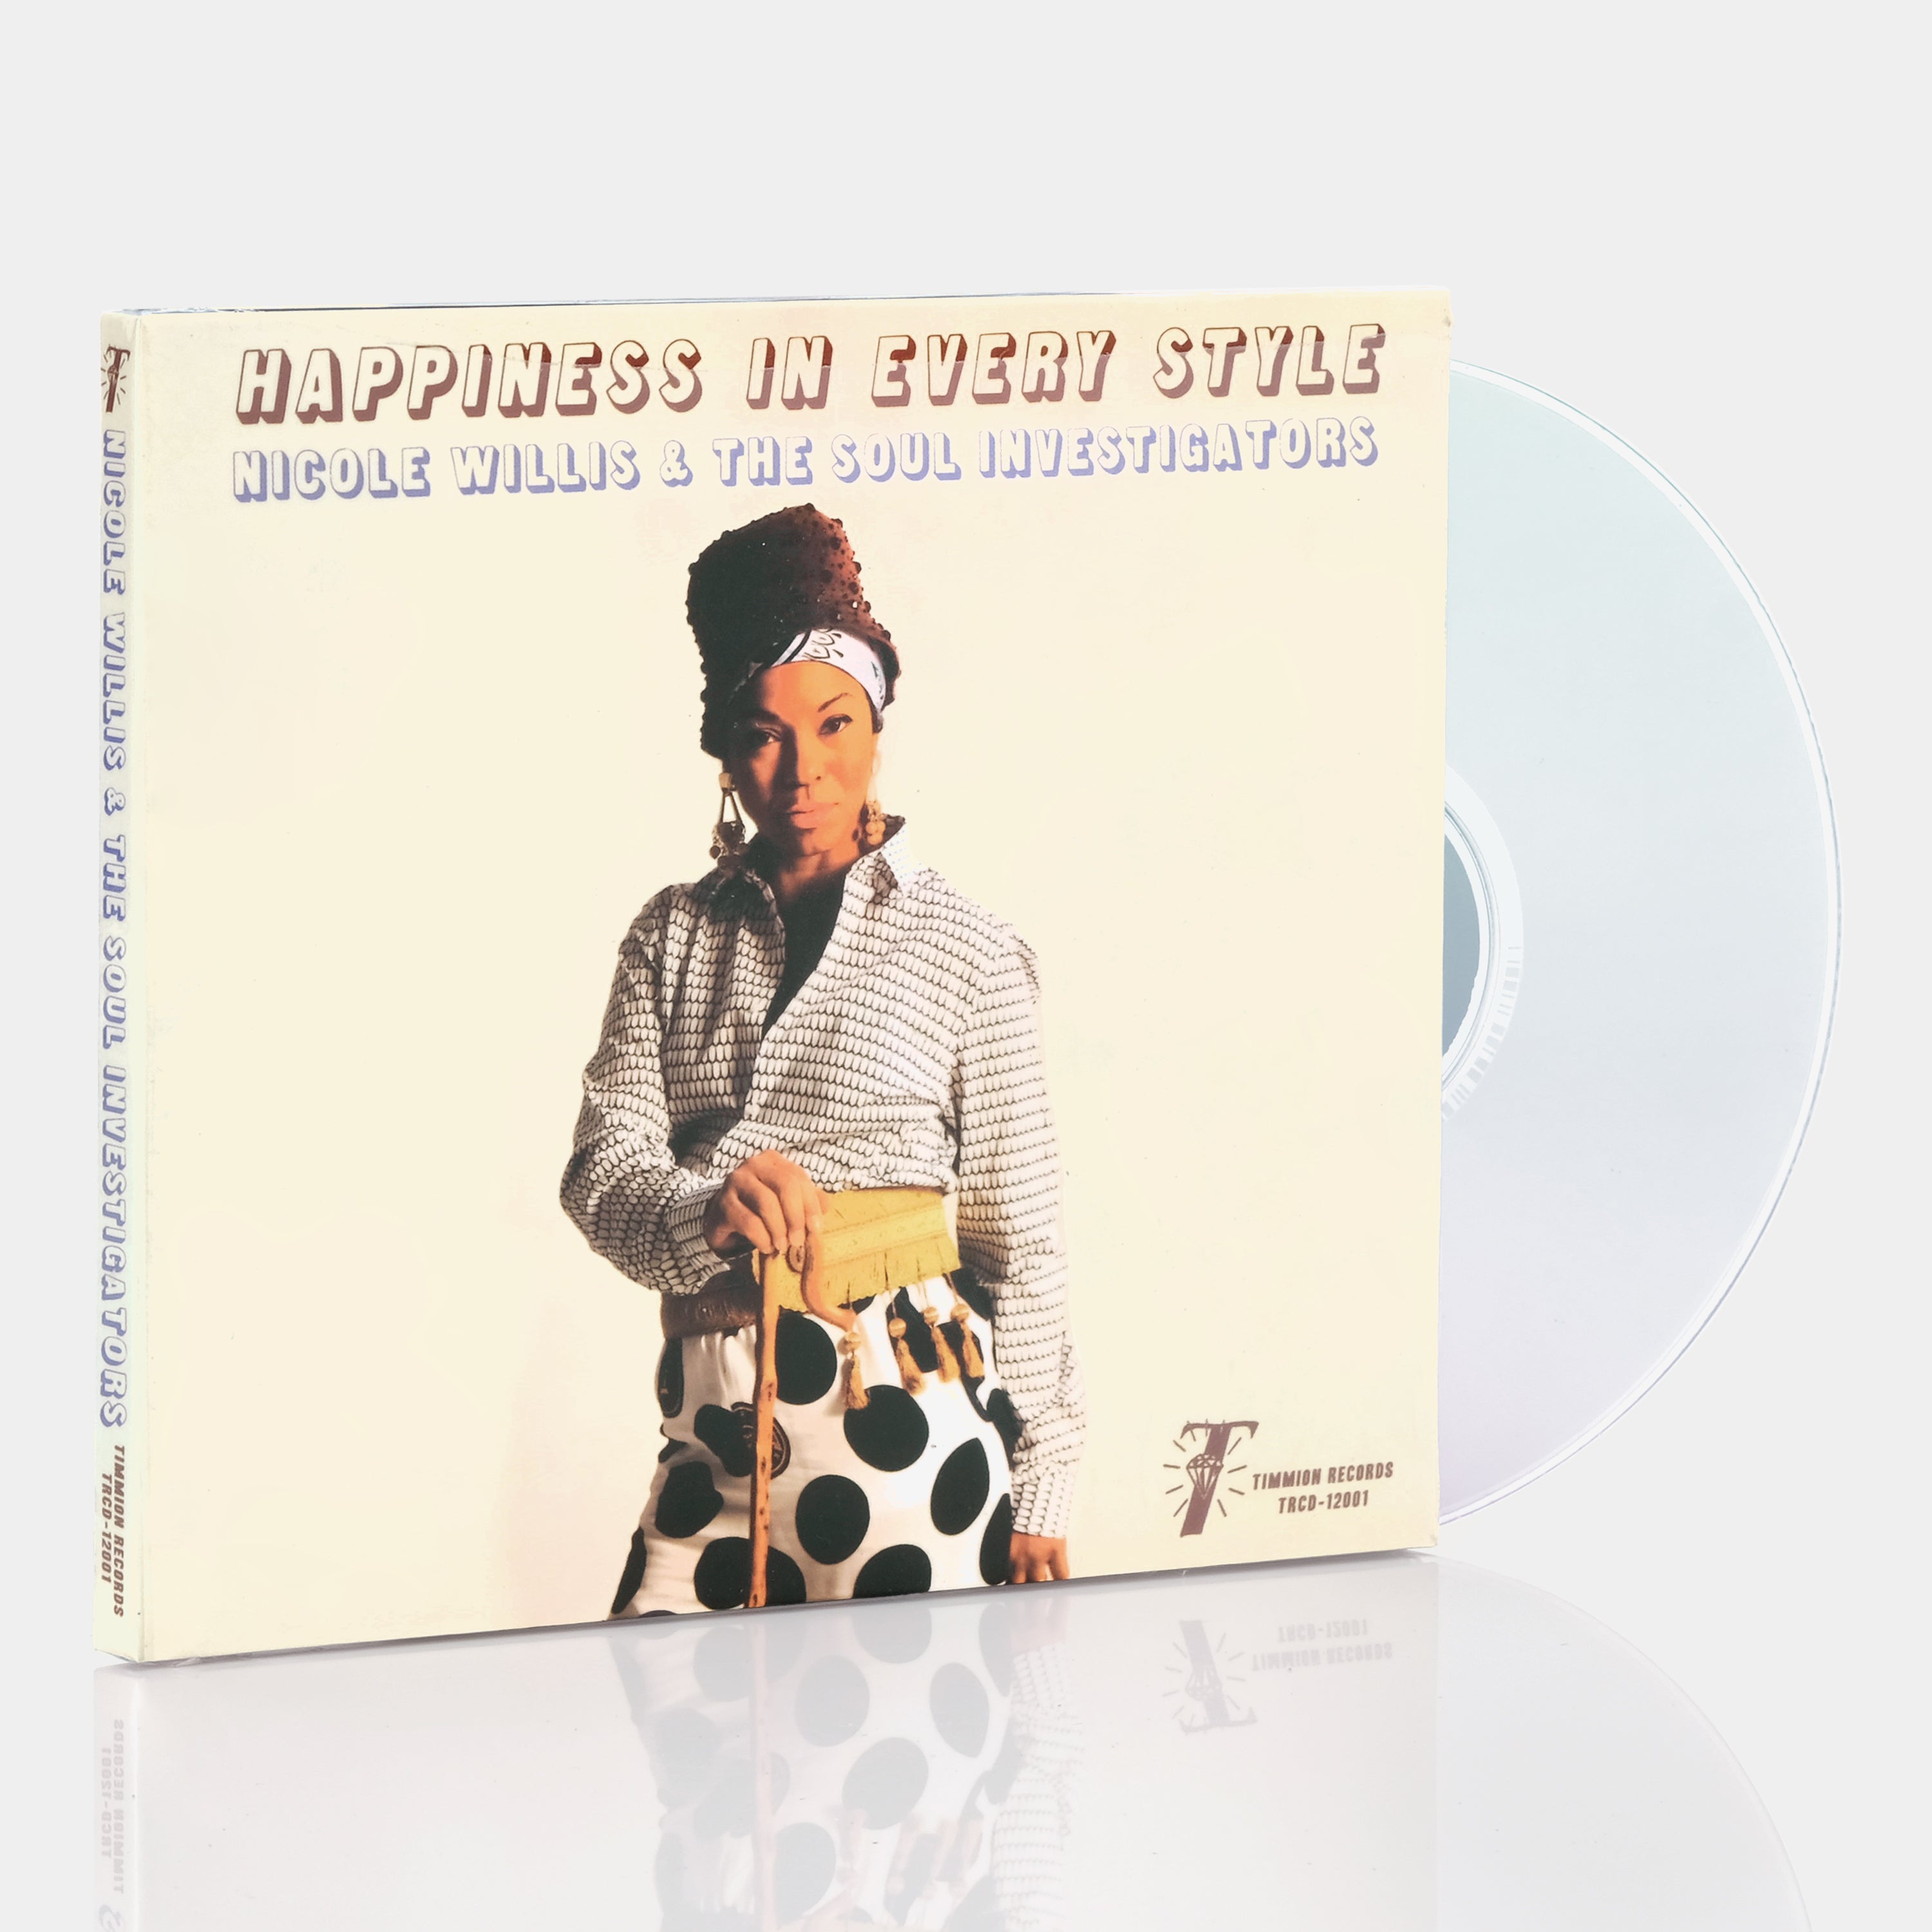 Nicole Willis & The Soul Investigators - Happiness In Every Style CD